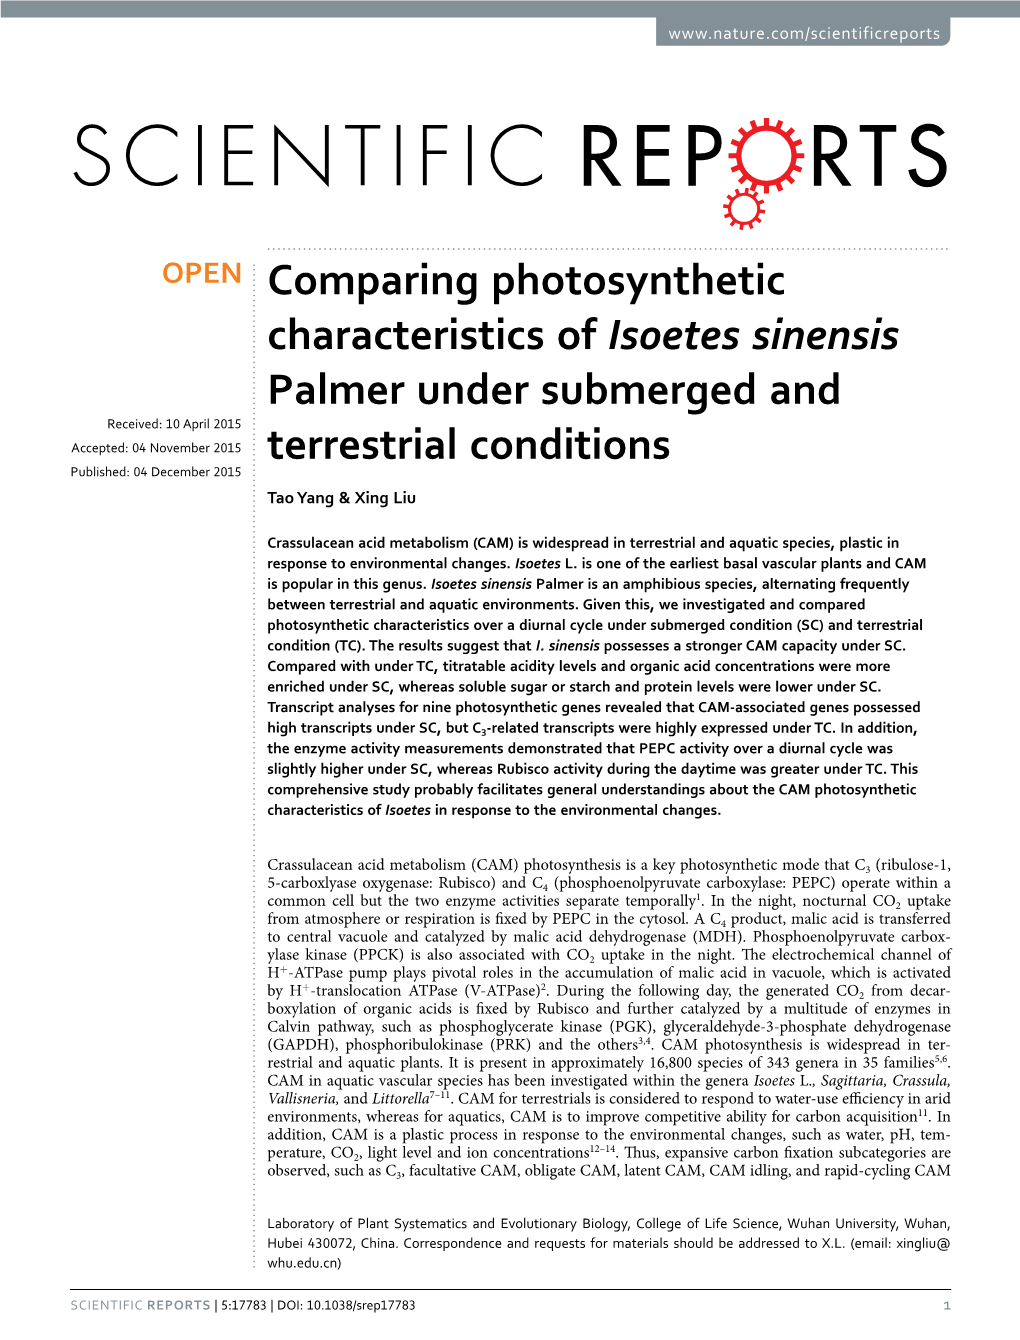 Comparing Photosynthetic Characteristics of Isoetes Sinensis Palmer Under Submerged and Terrestrial Conditions